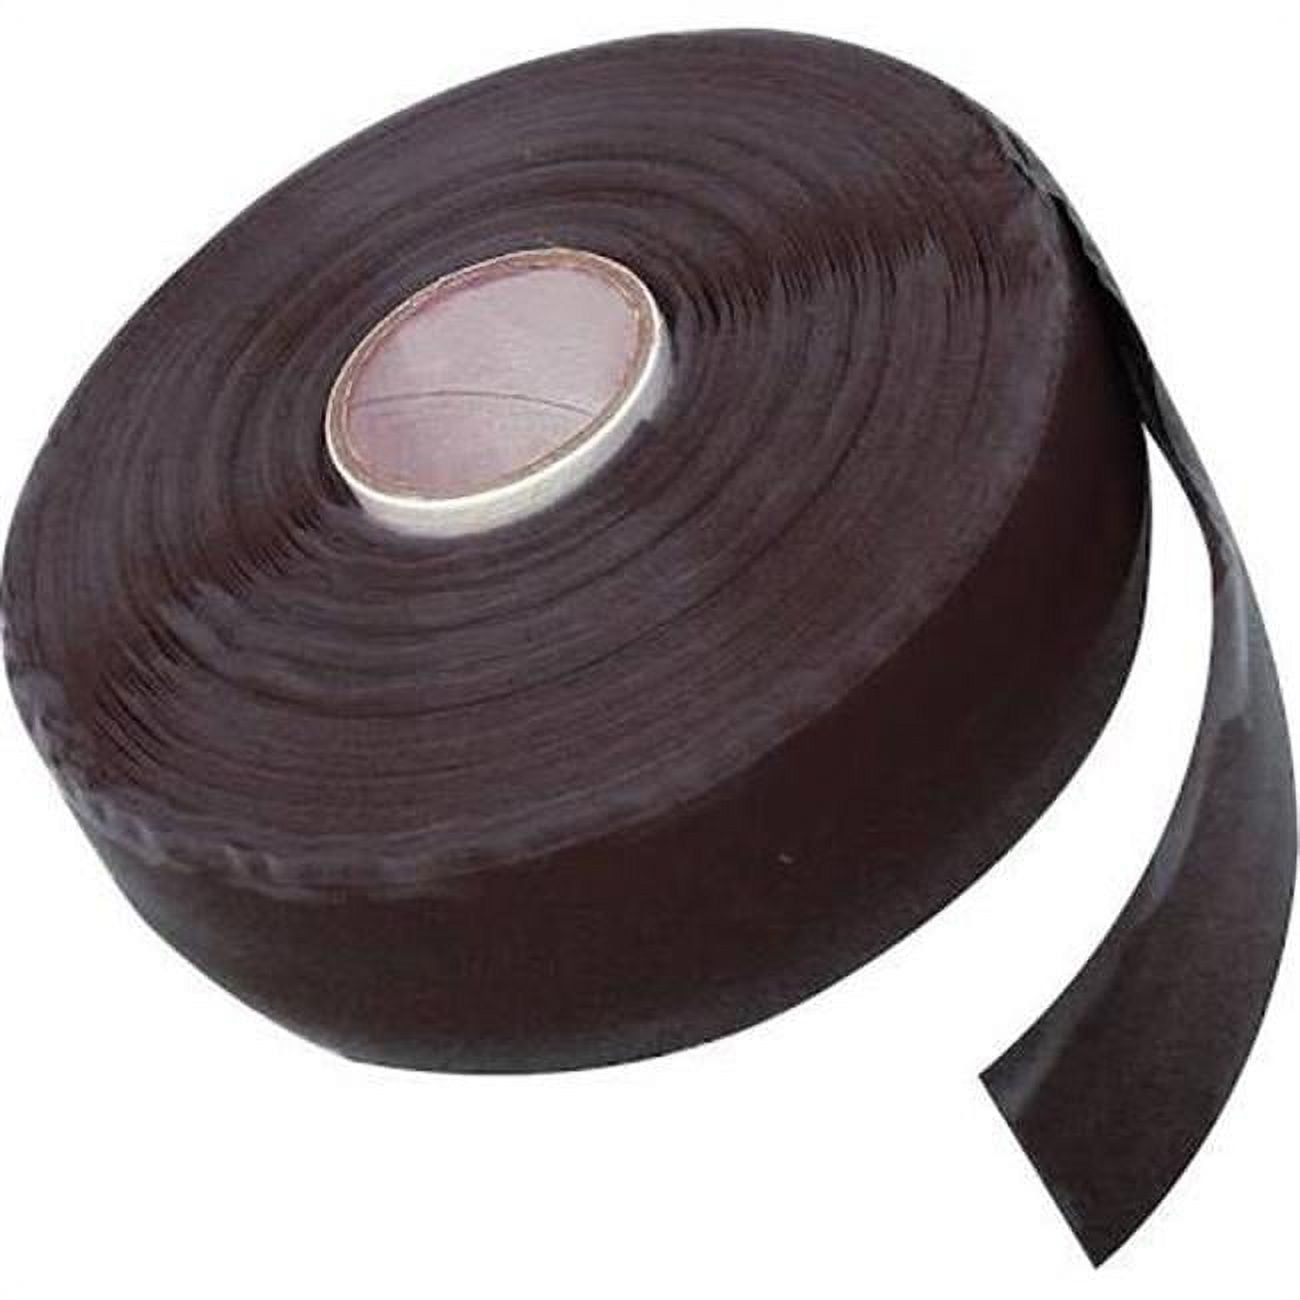 Heat Resistant 0.25IN,0.125IN,0.375IN,0.39IN,0.5IN,0.75IN Heat Press Tape,  Heat Resistant Tape, Heat Transfer Tape, High Temperature Tape Thermal Tape Sublimation  Tape Heat Tape for Hair Styling 